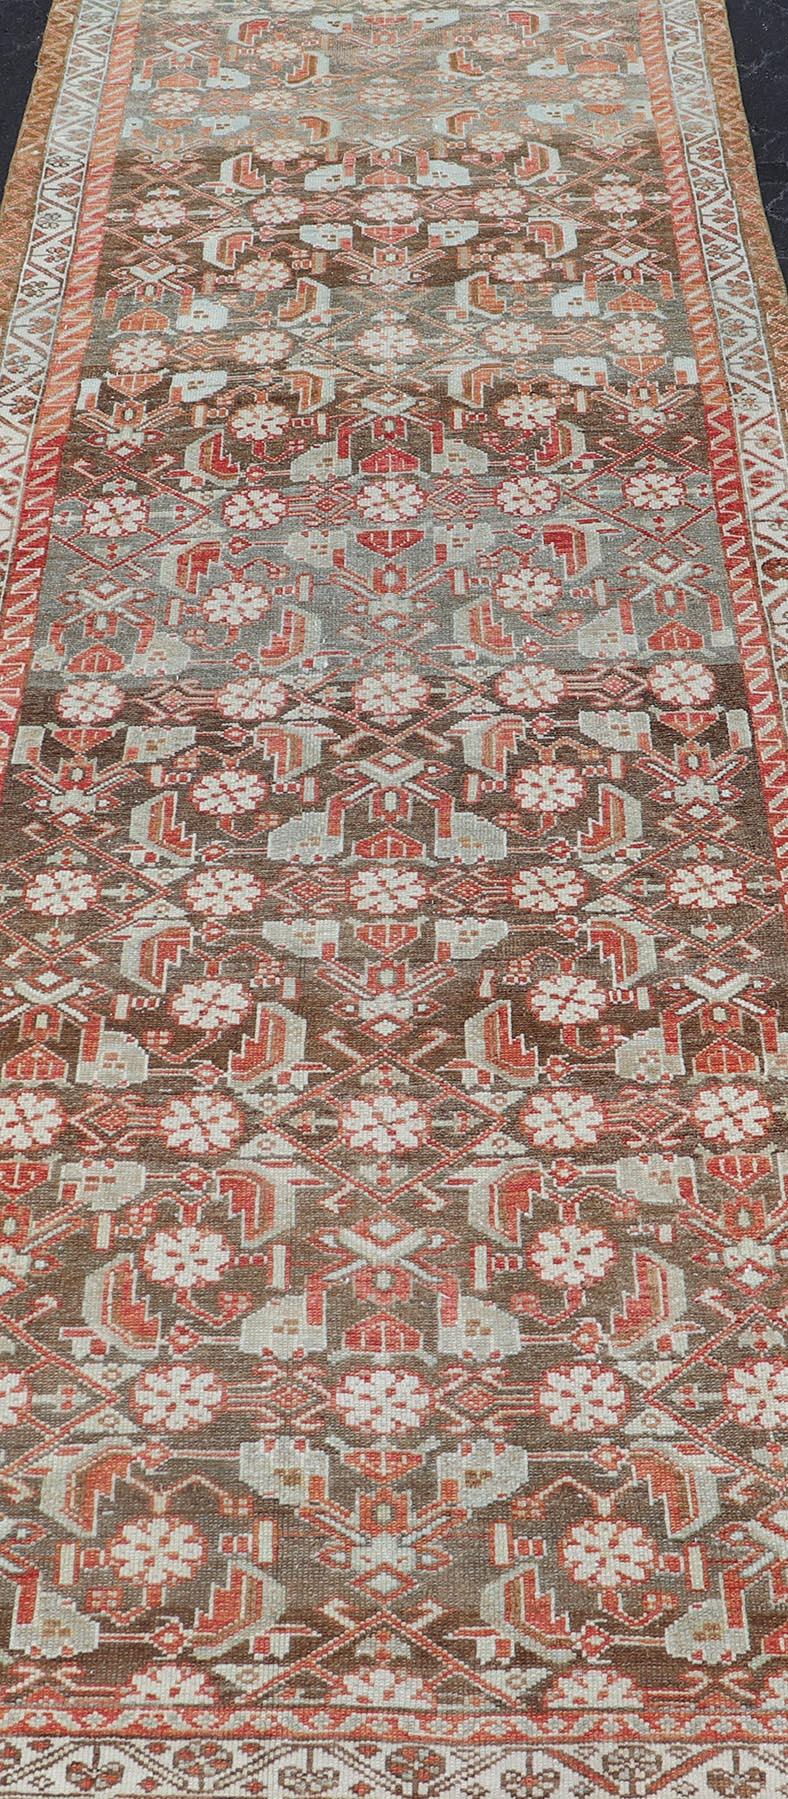 Antique Persian Malayer with Sub-Geometric Floral Design in Reds & Earthy Tones In Good Condition For Sale In Atlanta, GA